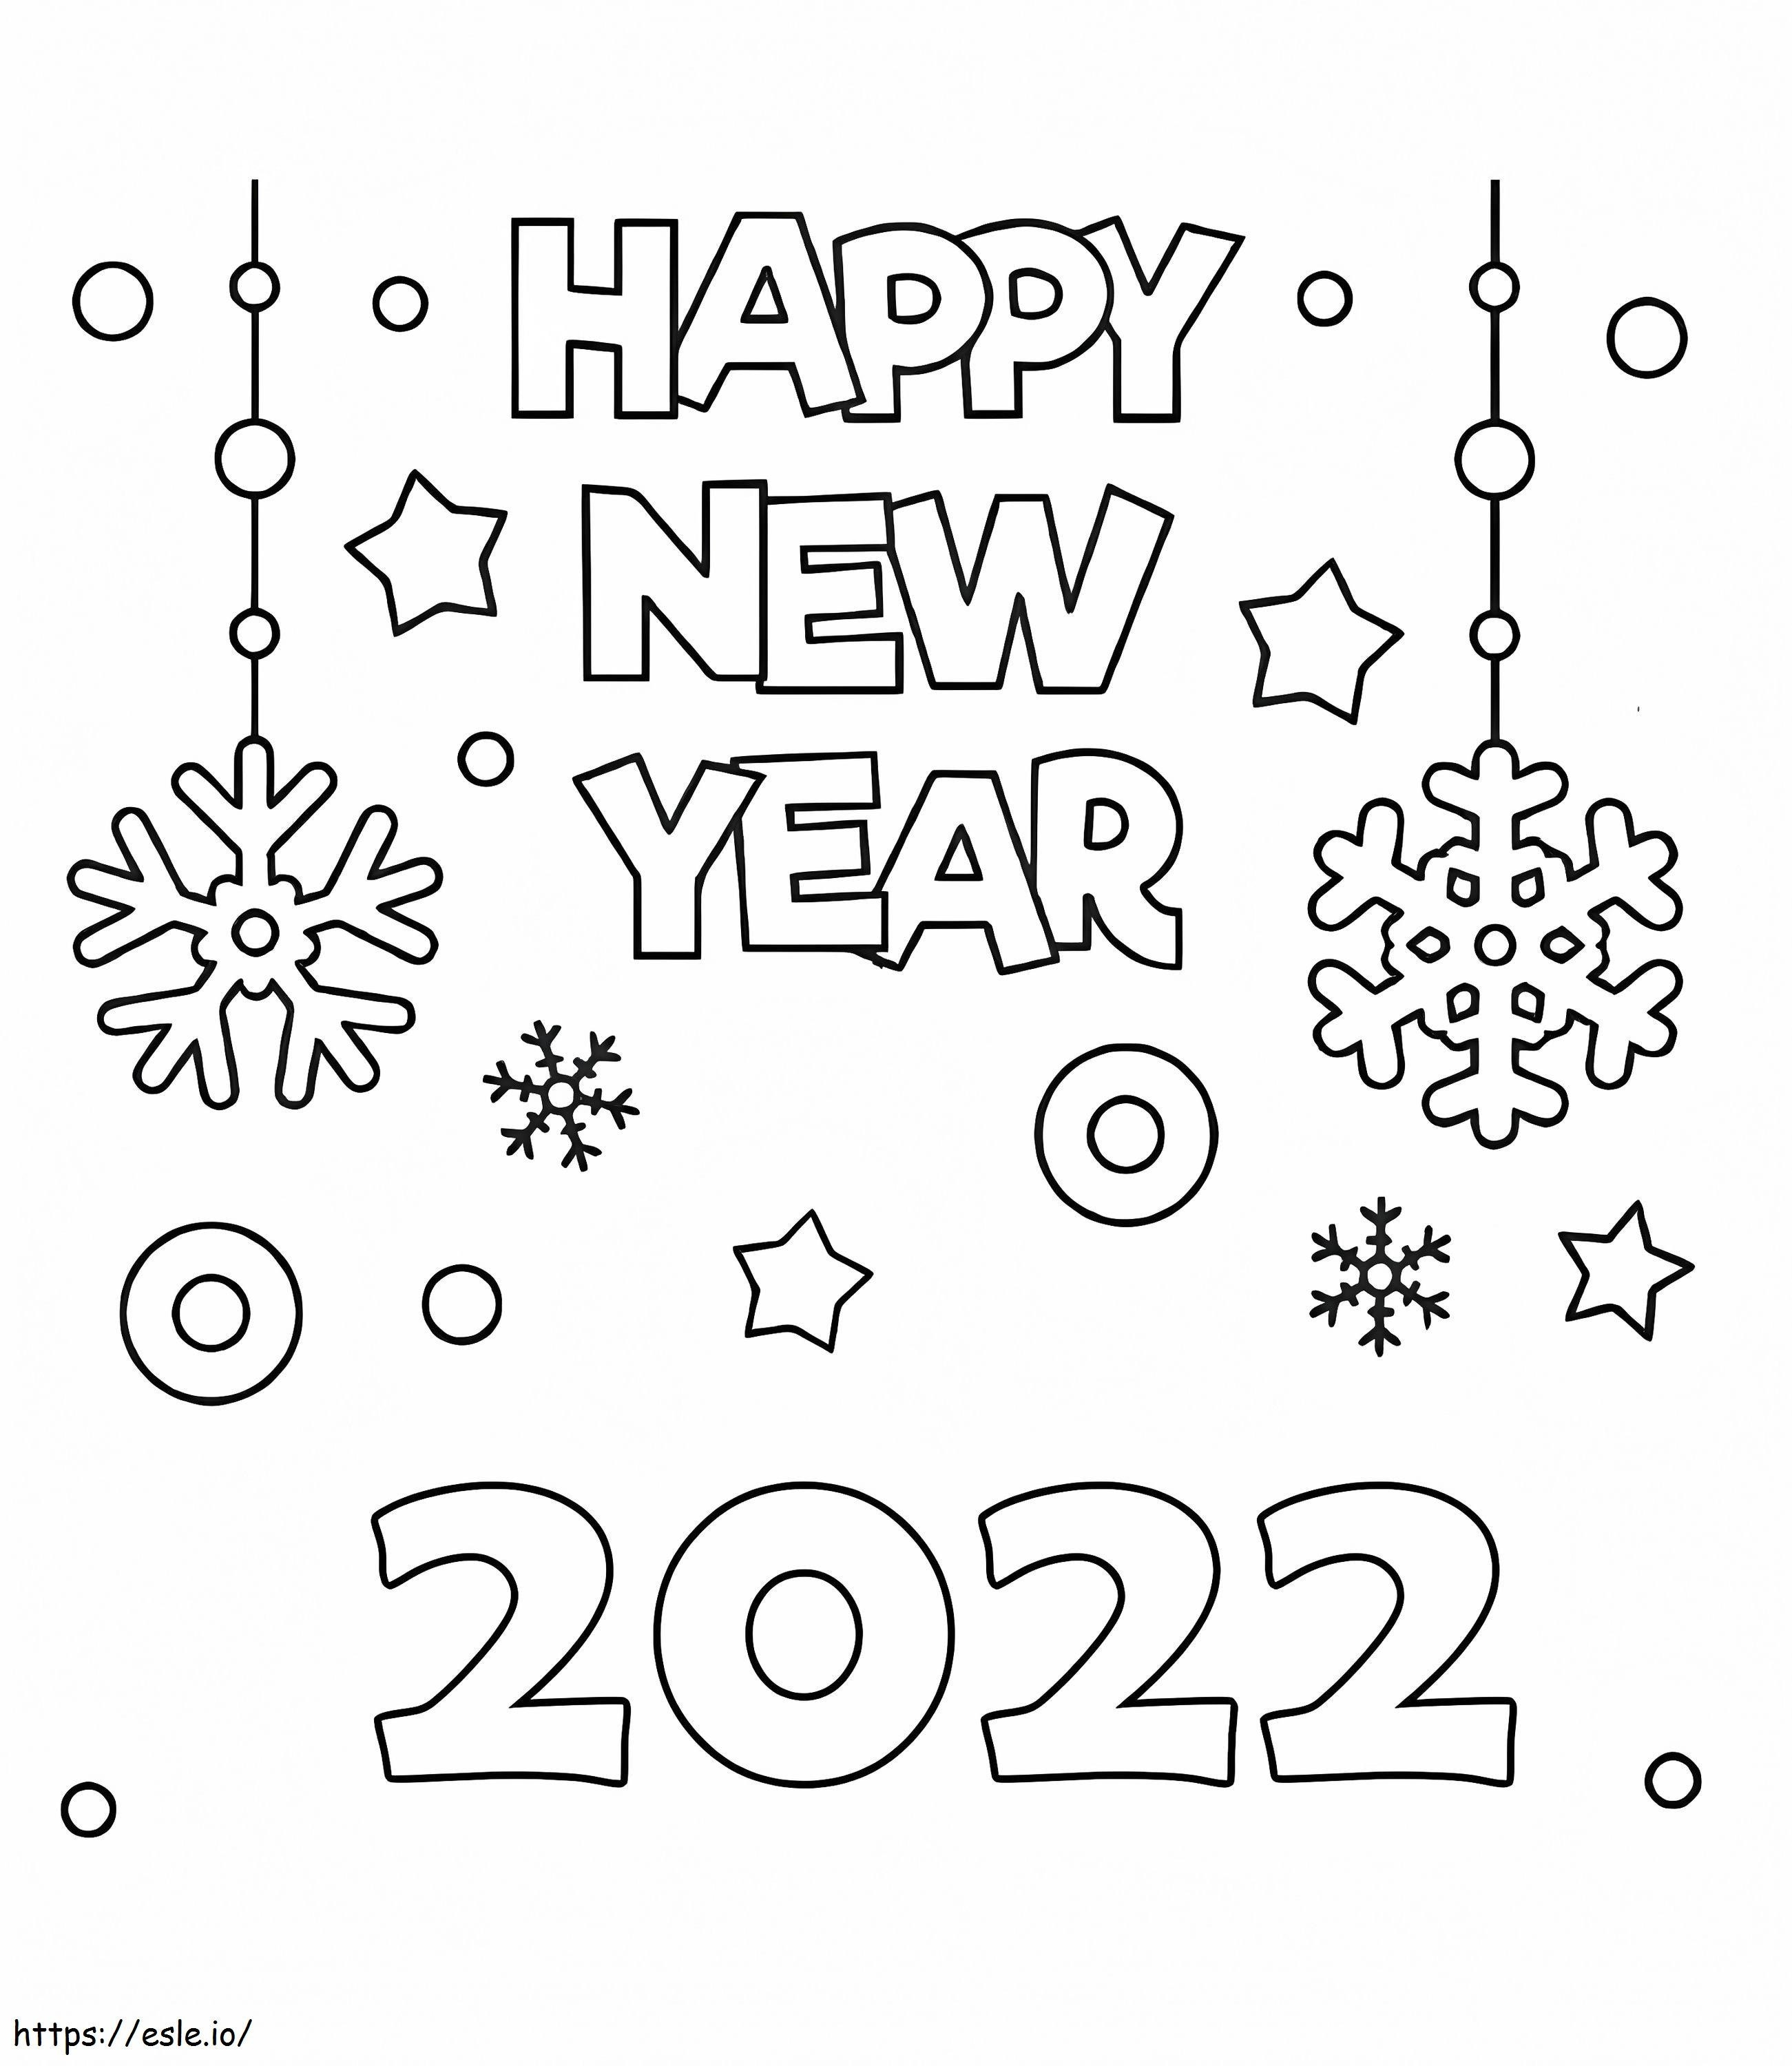 Printable 2022 New Year coloring page